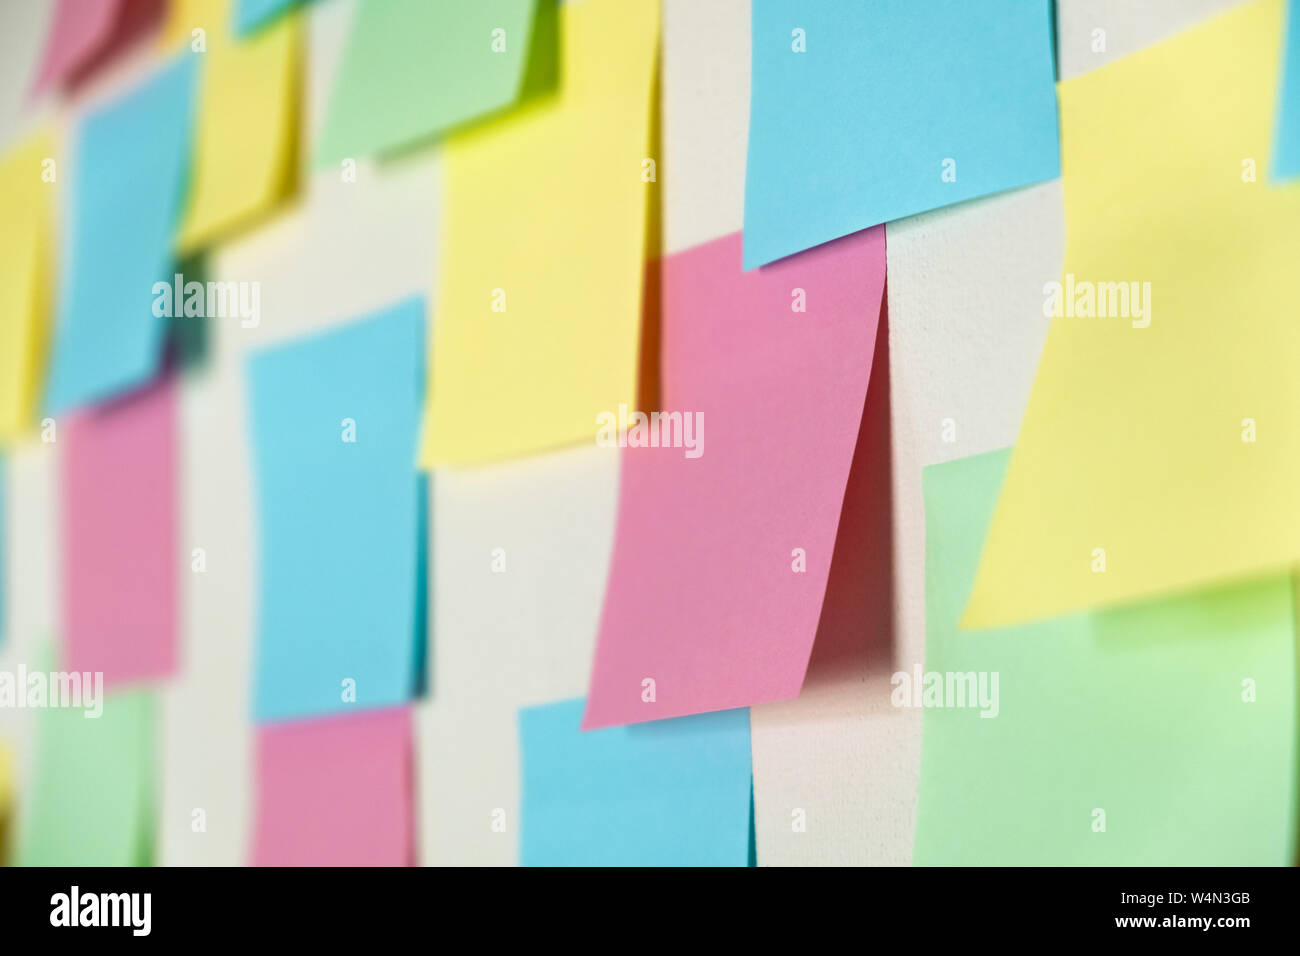 Sticky paper notes on a planning board, close-up view. Planning, brainstorm, diversity or fresh ideas concept - pattern of empty multicolored paper no Stock Photo